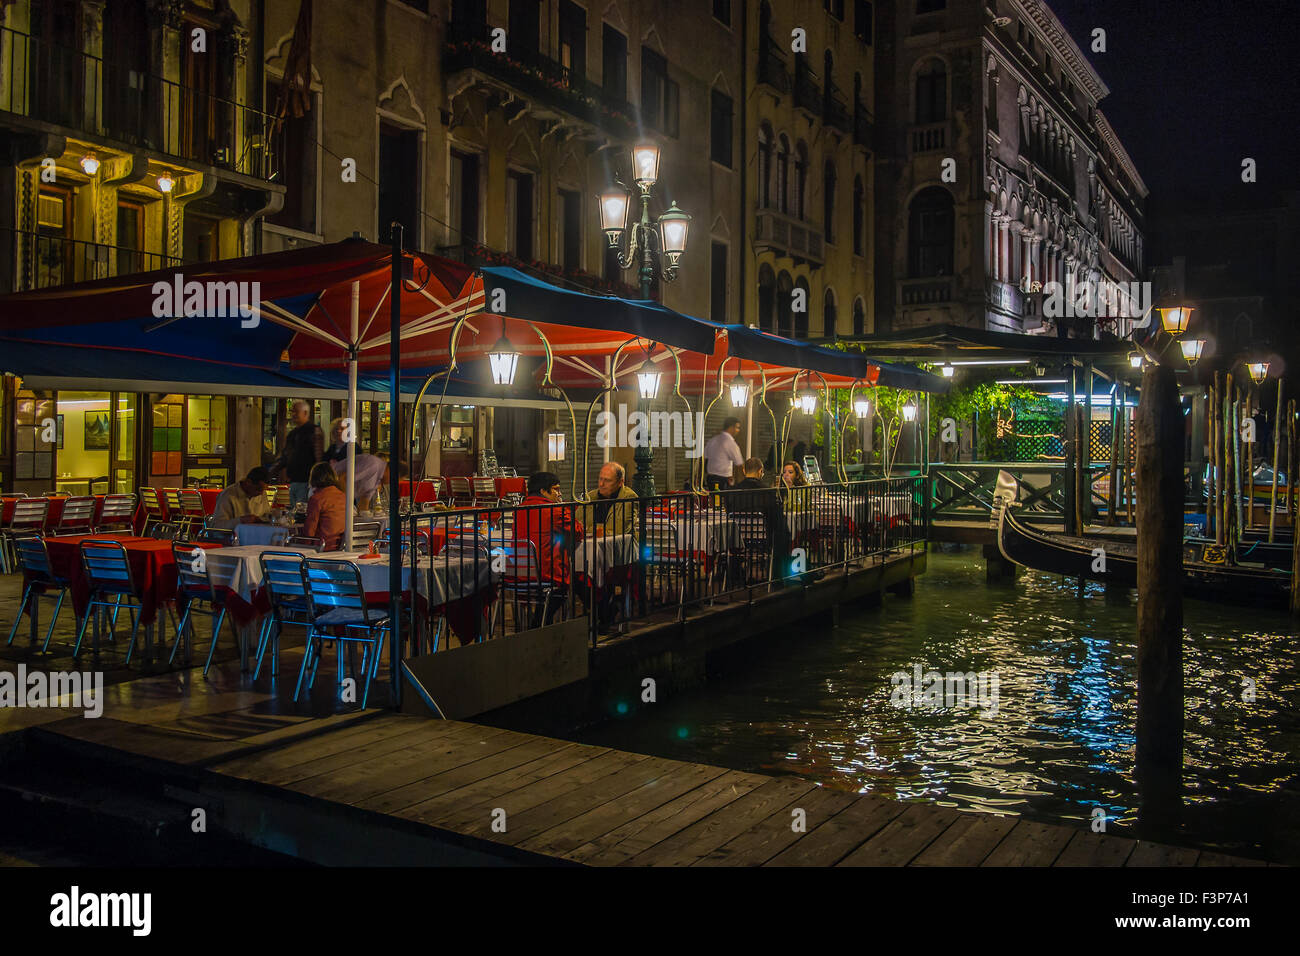 VENICE, ITALY - MAY 05, 2015: Restaurant Bar by the side of canal in Venice at night Stock Photo